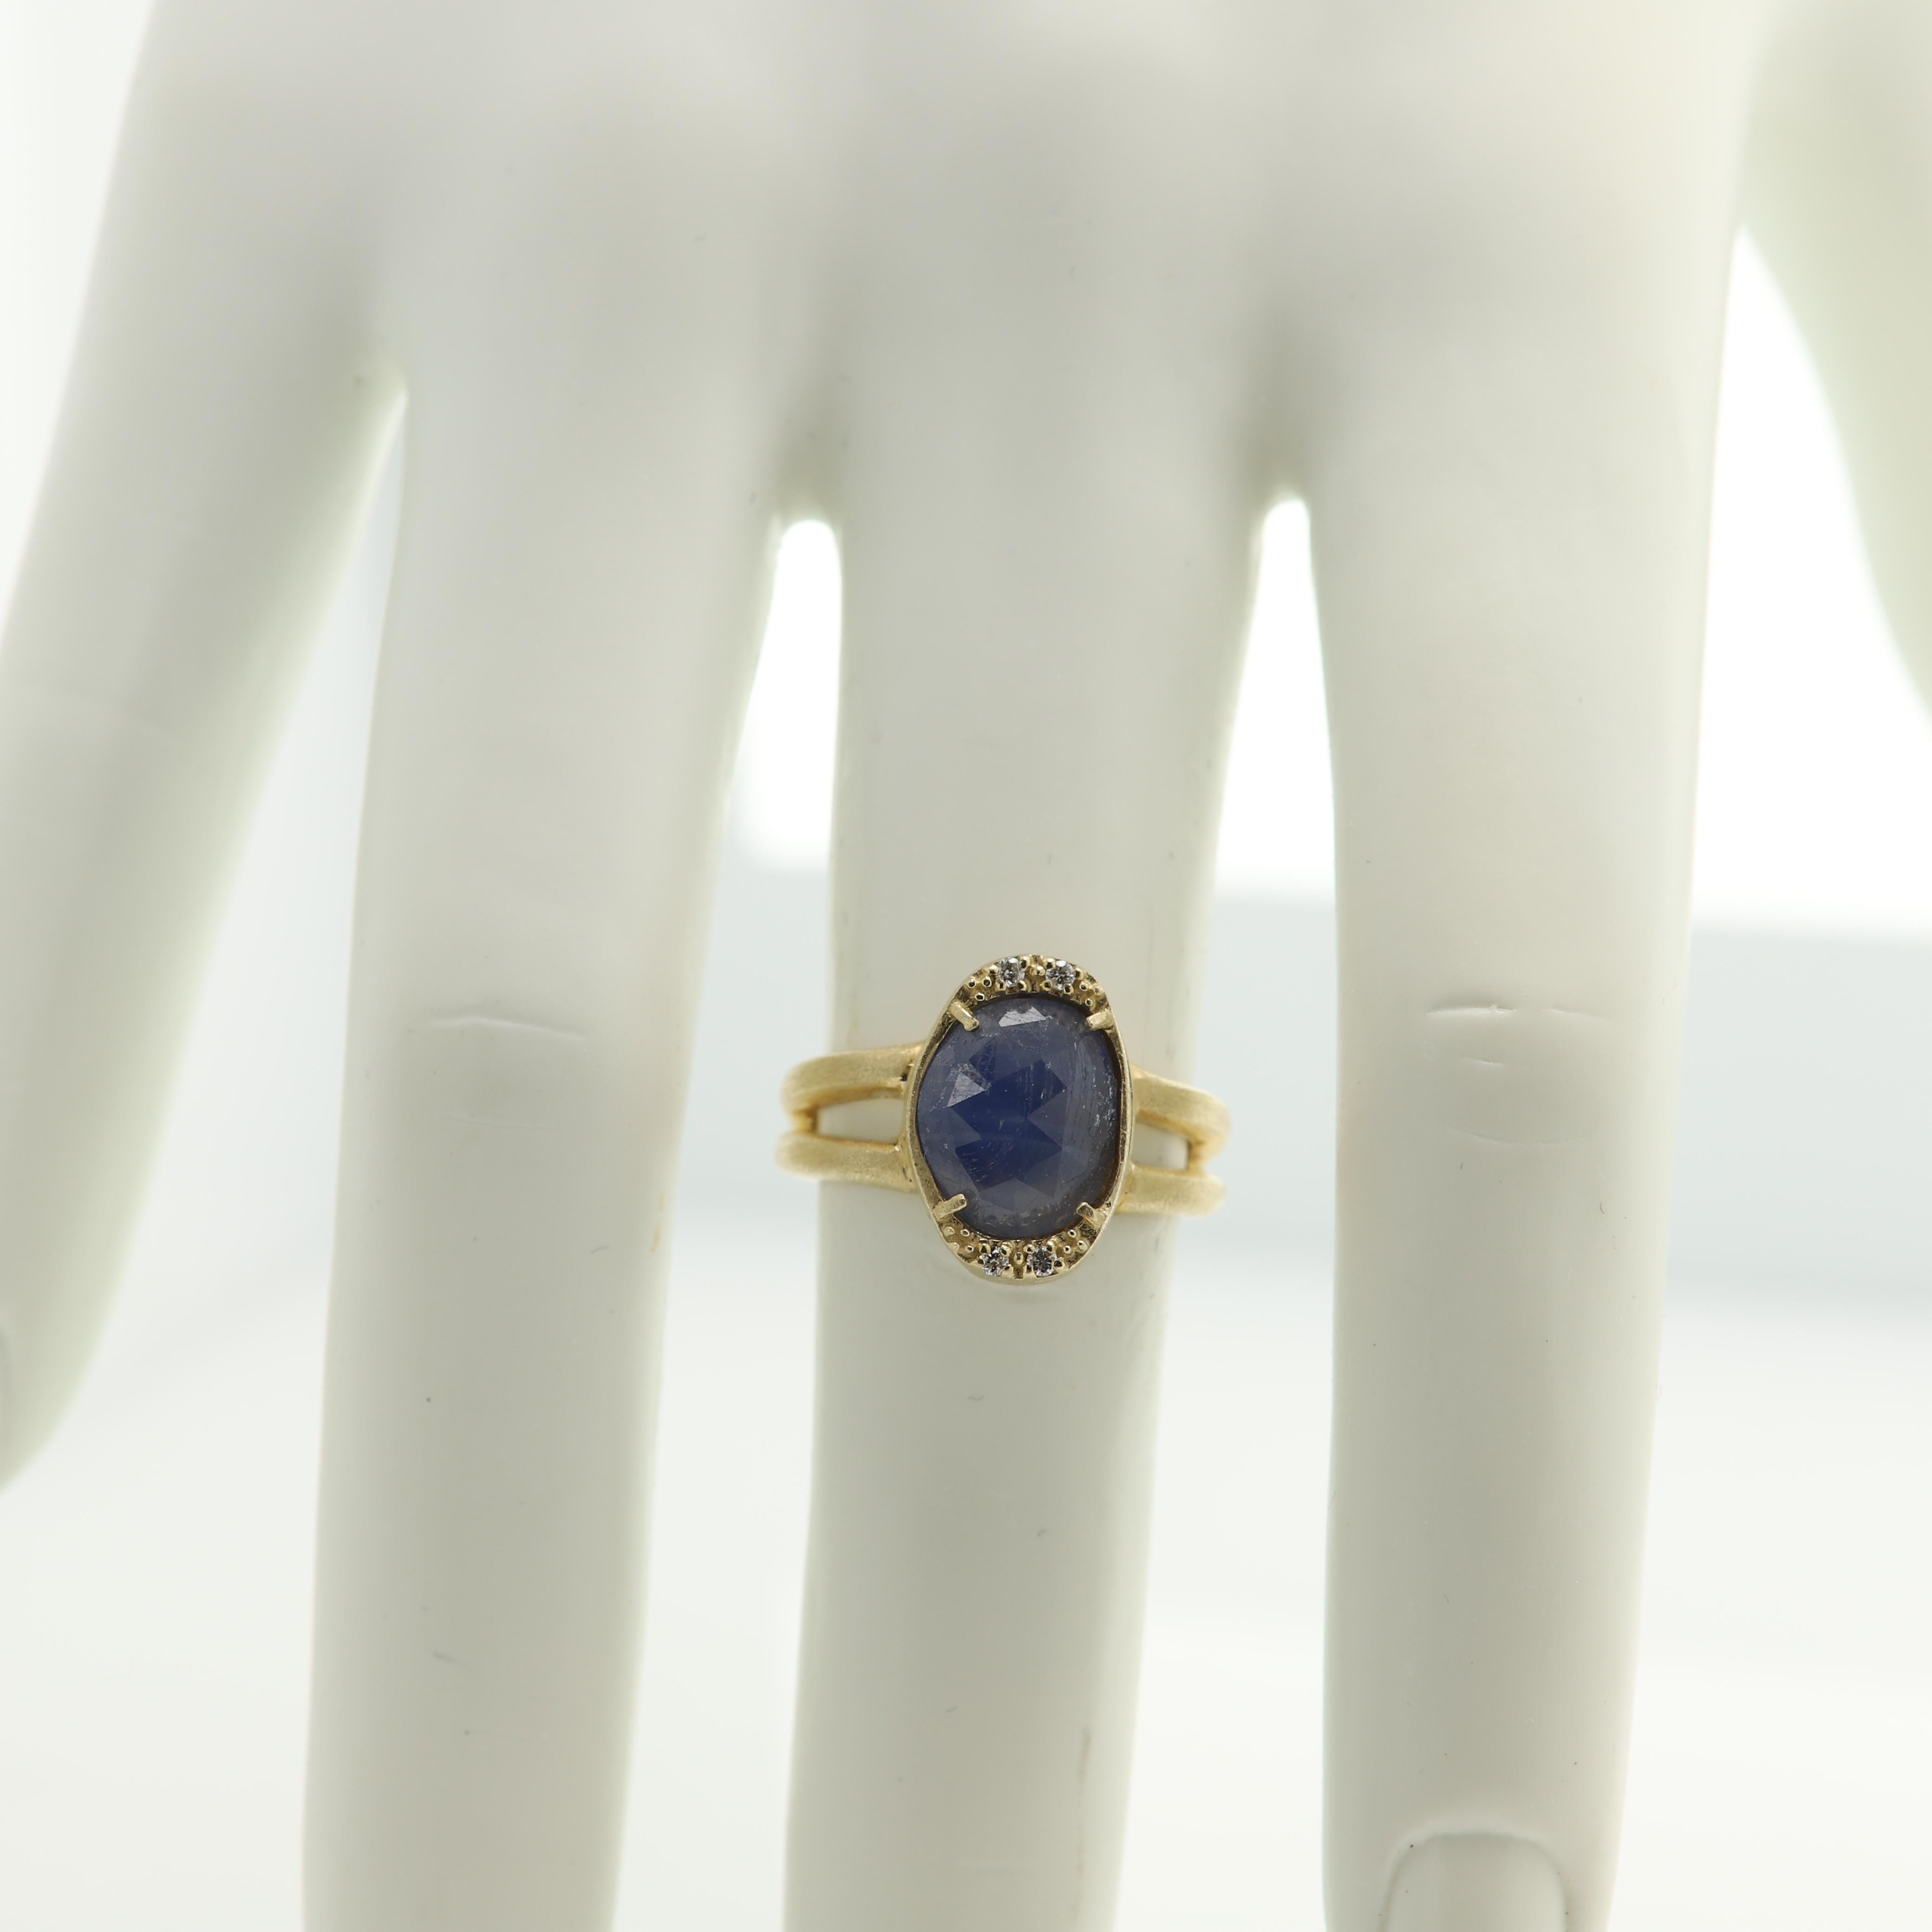 Vintage Sapphire & Diamonds - Hand Made in Italy
18k Yellow Gold 7.20 grams - mat finish (not shiney gold)
Blue Sapphire is a 